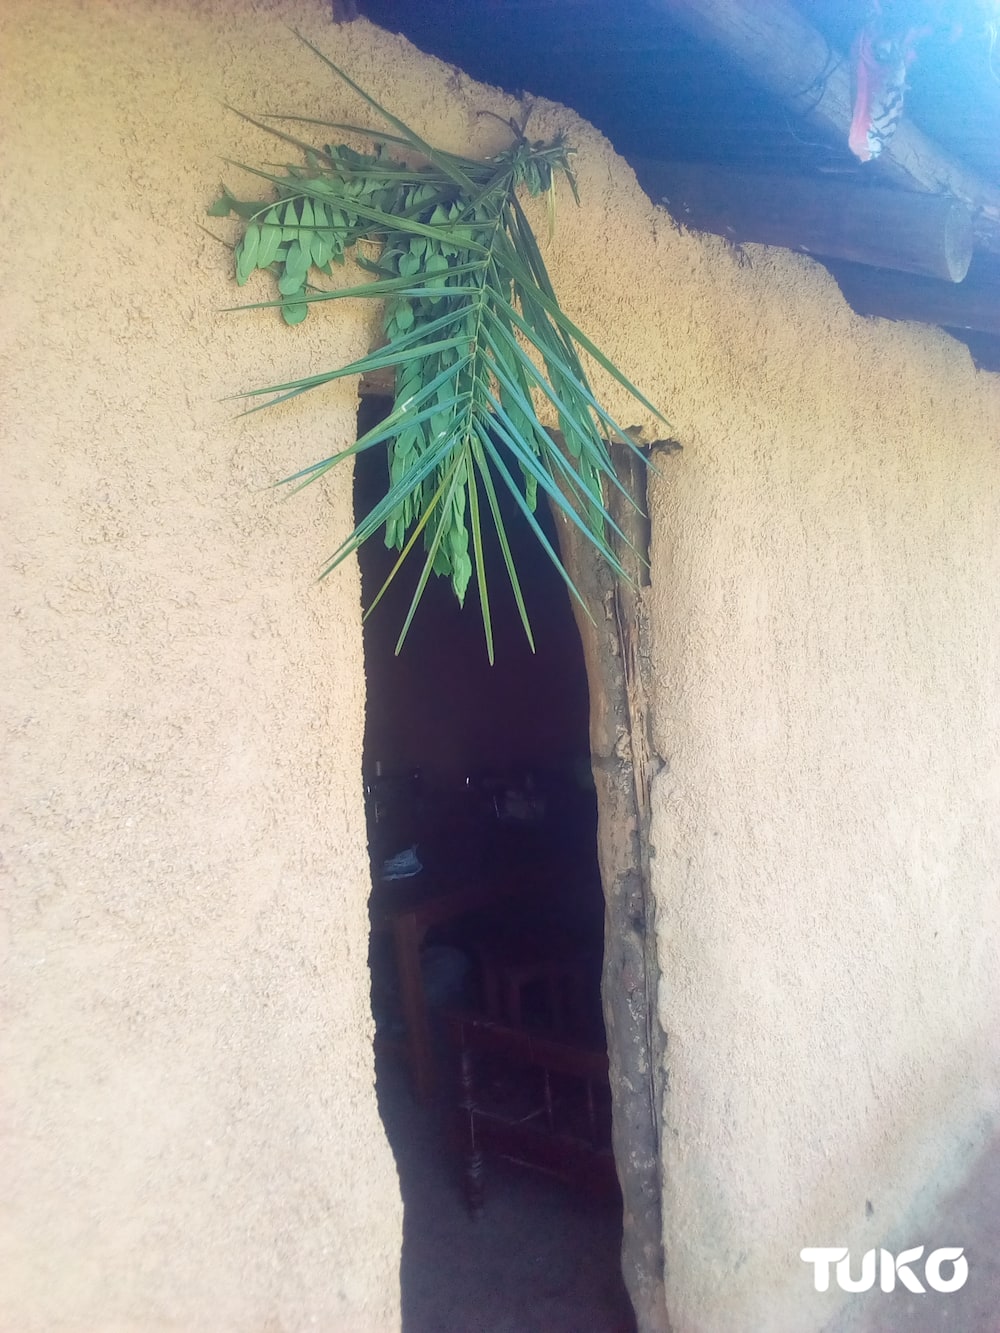 Engo: Tree branches used by Maragoli community to notify parents of virgin girl she's ready for marriage